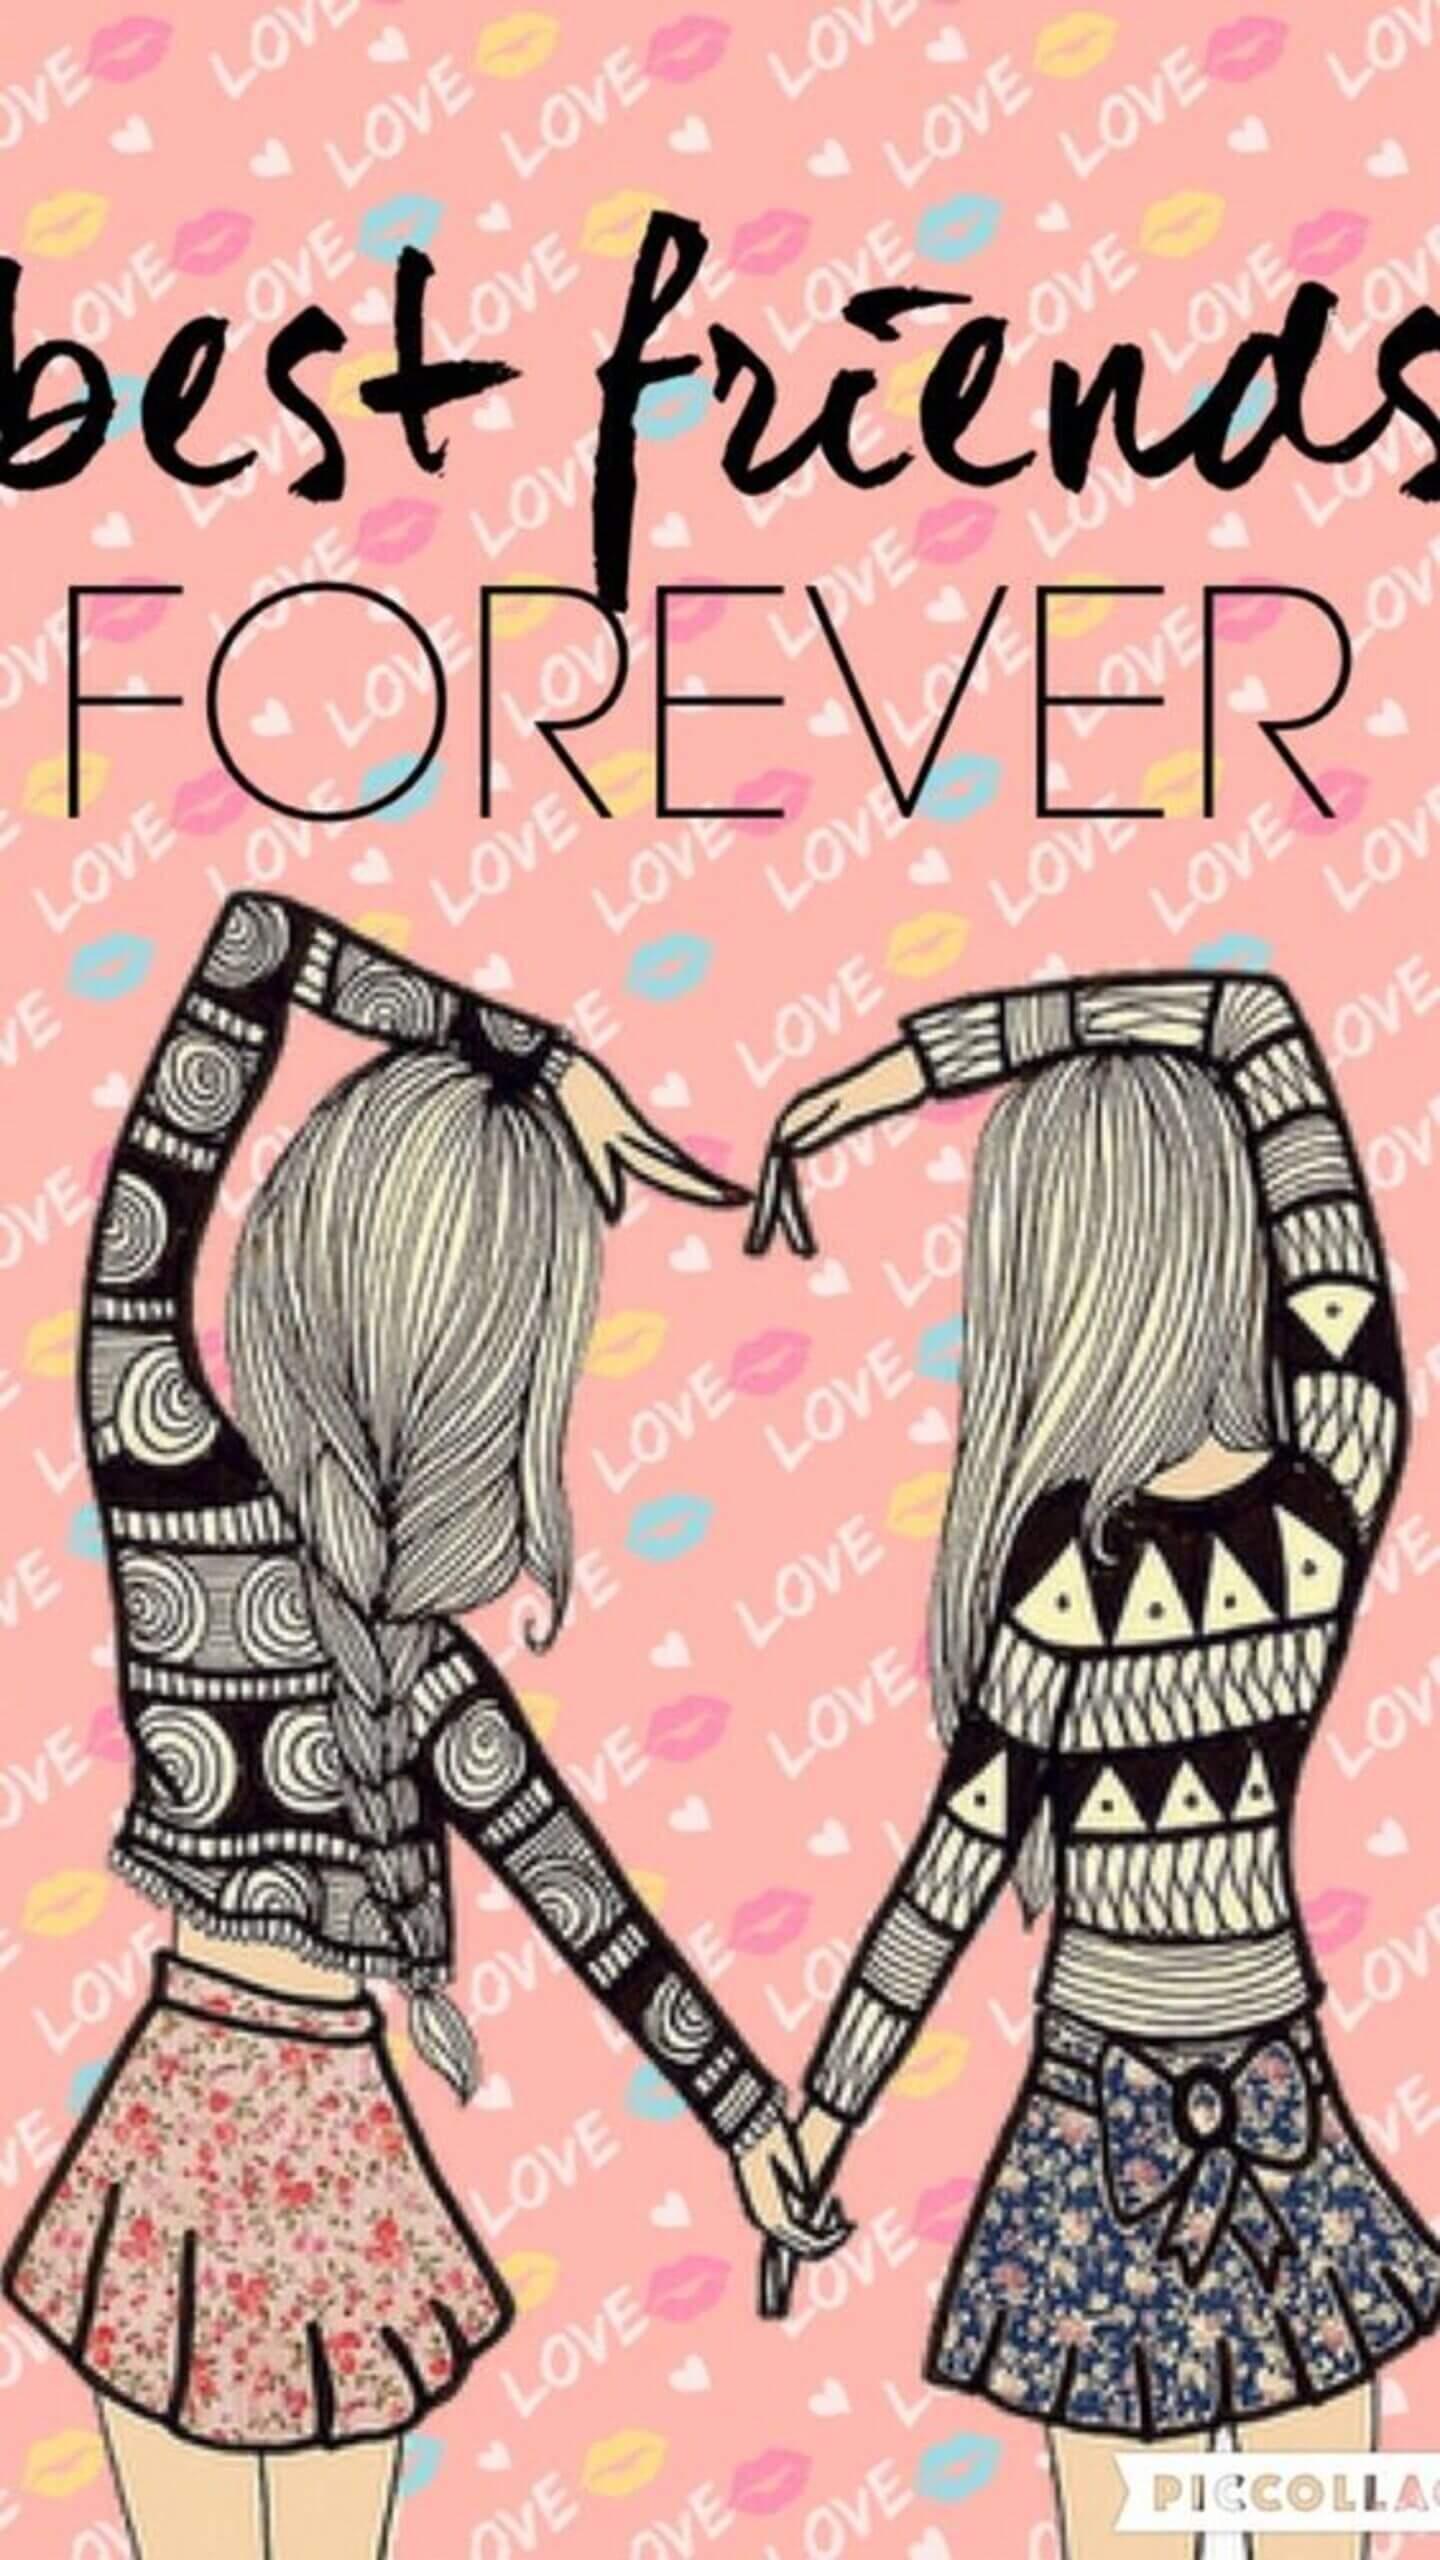 Best Friends Wallpaper Discover more Best Friend Best Friends Best friends  forever Bff Friend wallp  Friends wallpaper Best friend wallpaper  Friends forever